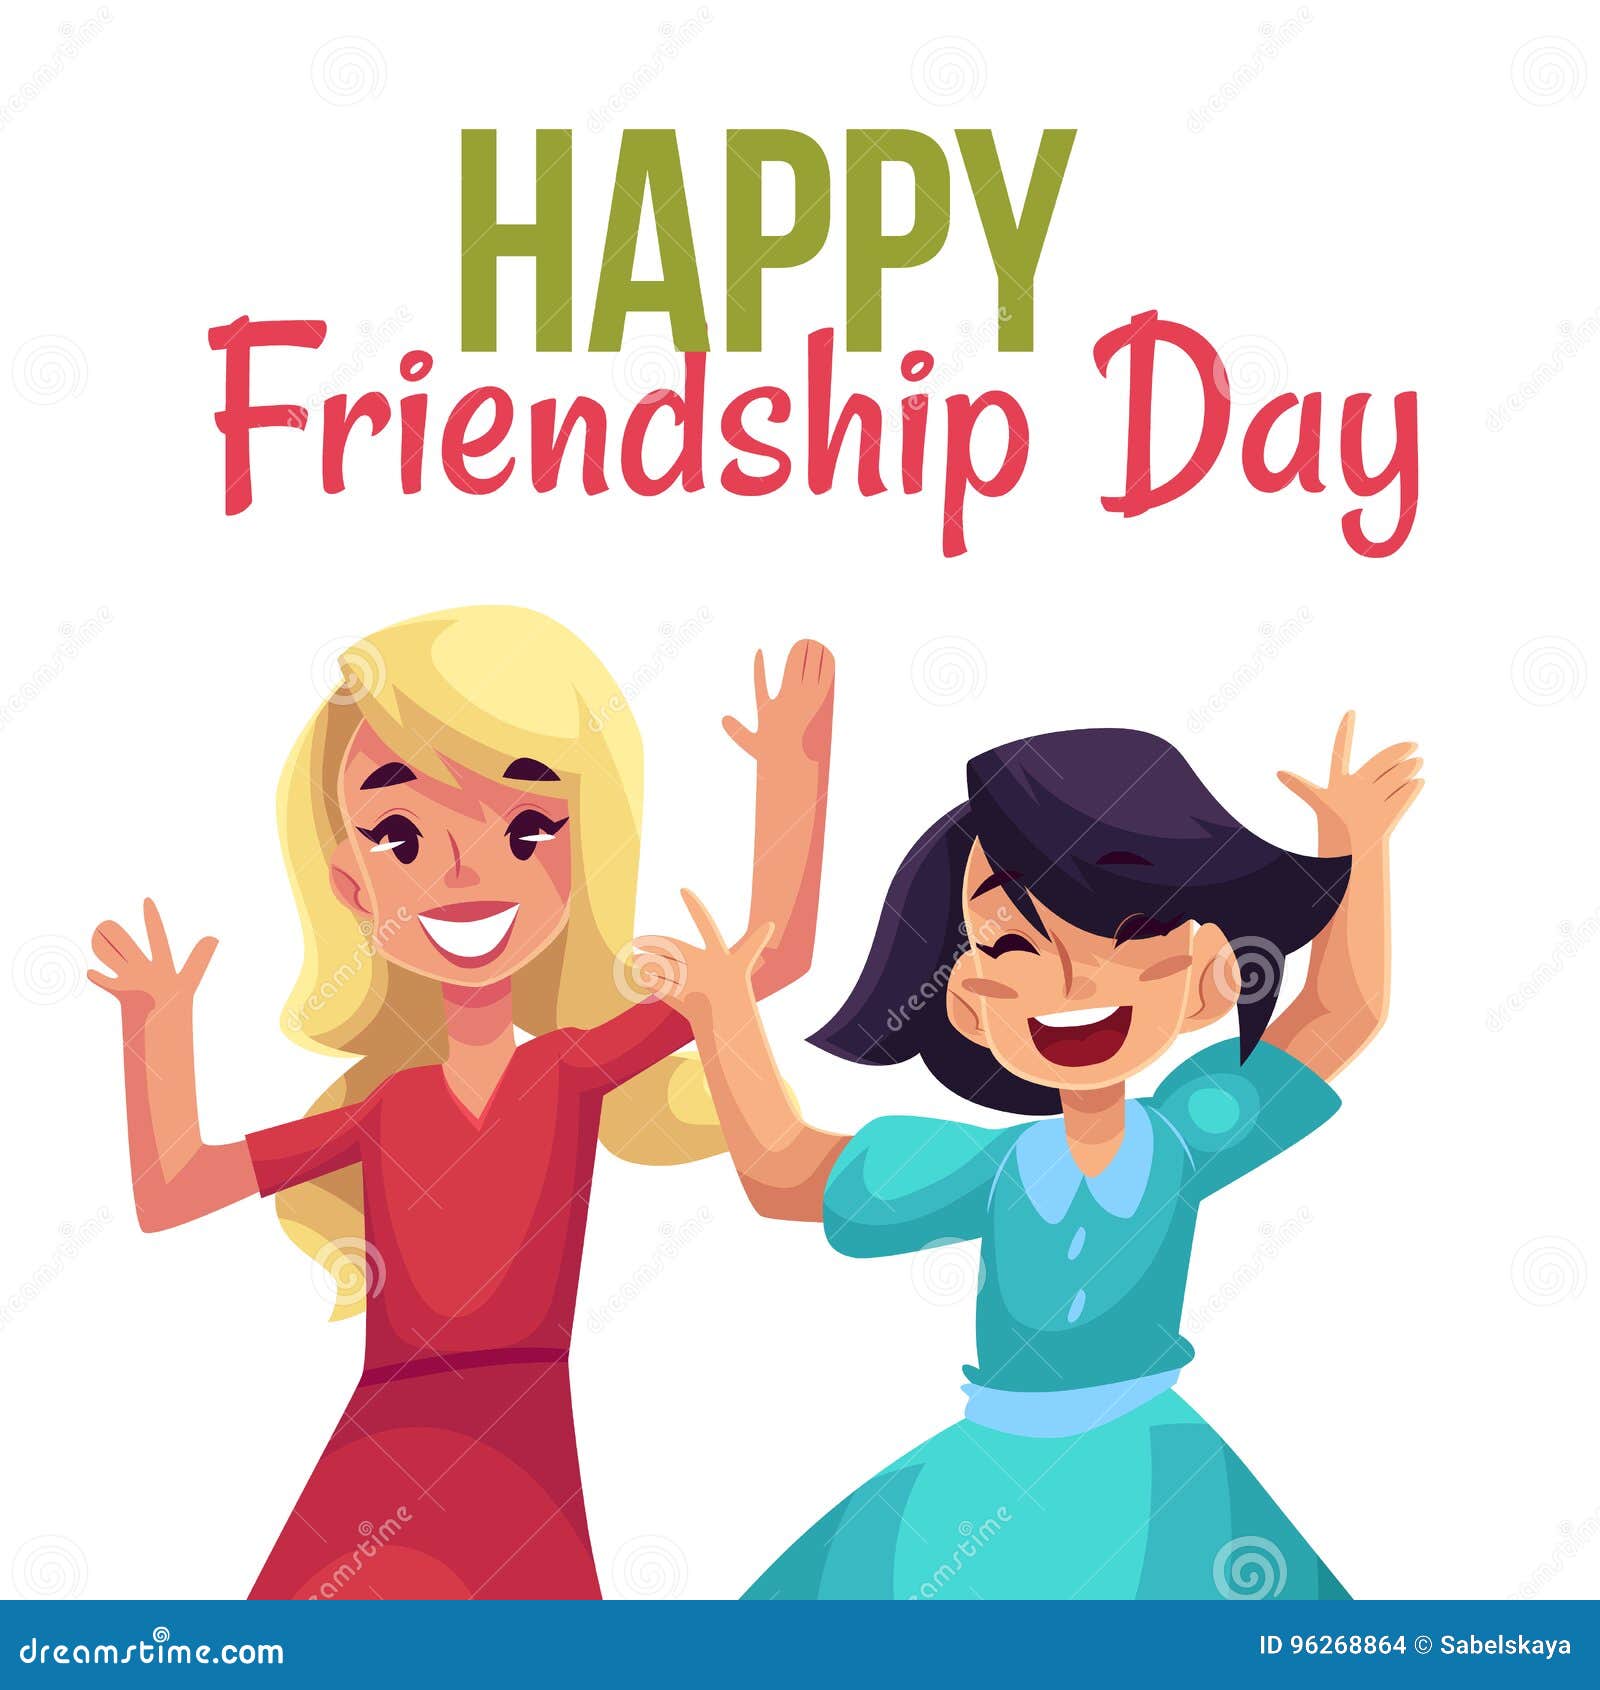 Happy Friendship Day Greeting Card Stock Vector - Illustration of ...